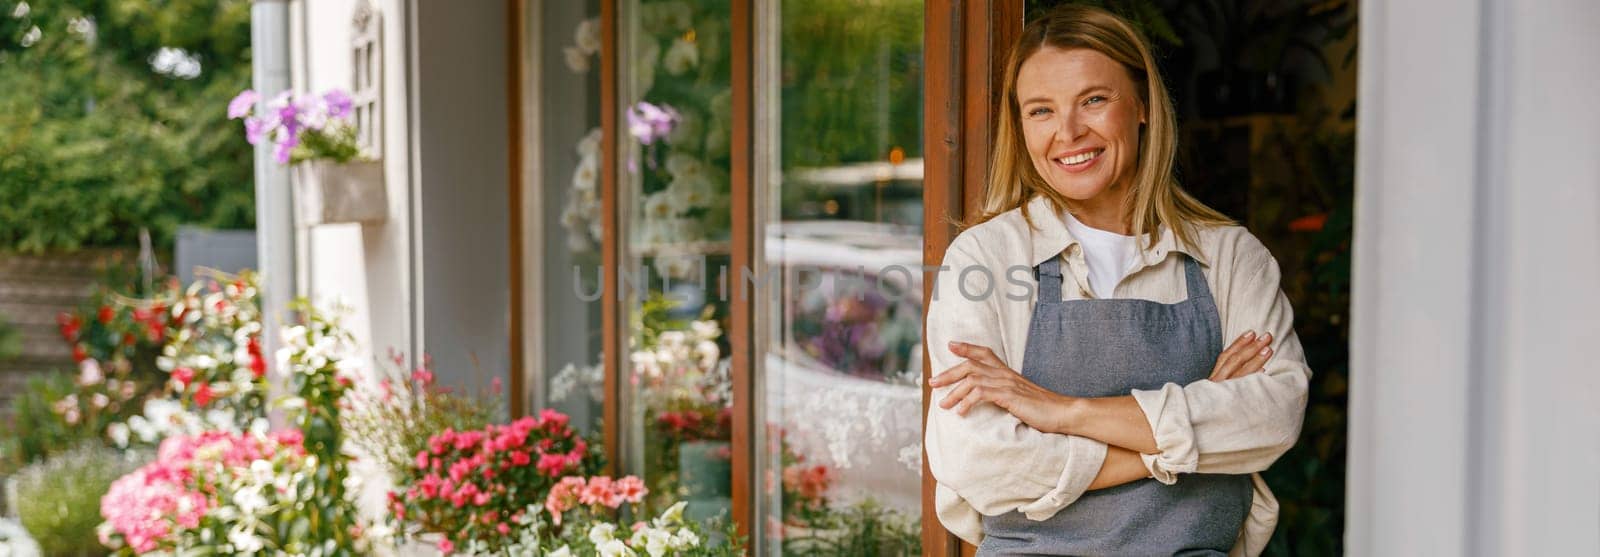 Smiling woman florist small business owner standing with crossed arms near own floral store by Yaroslav_astakhov